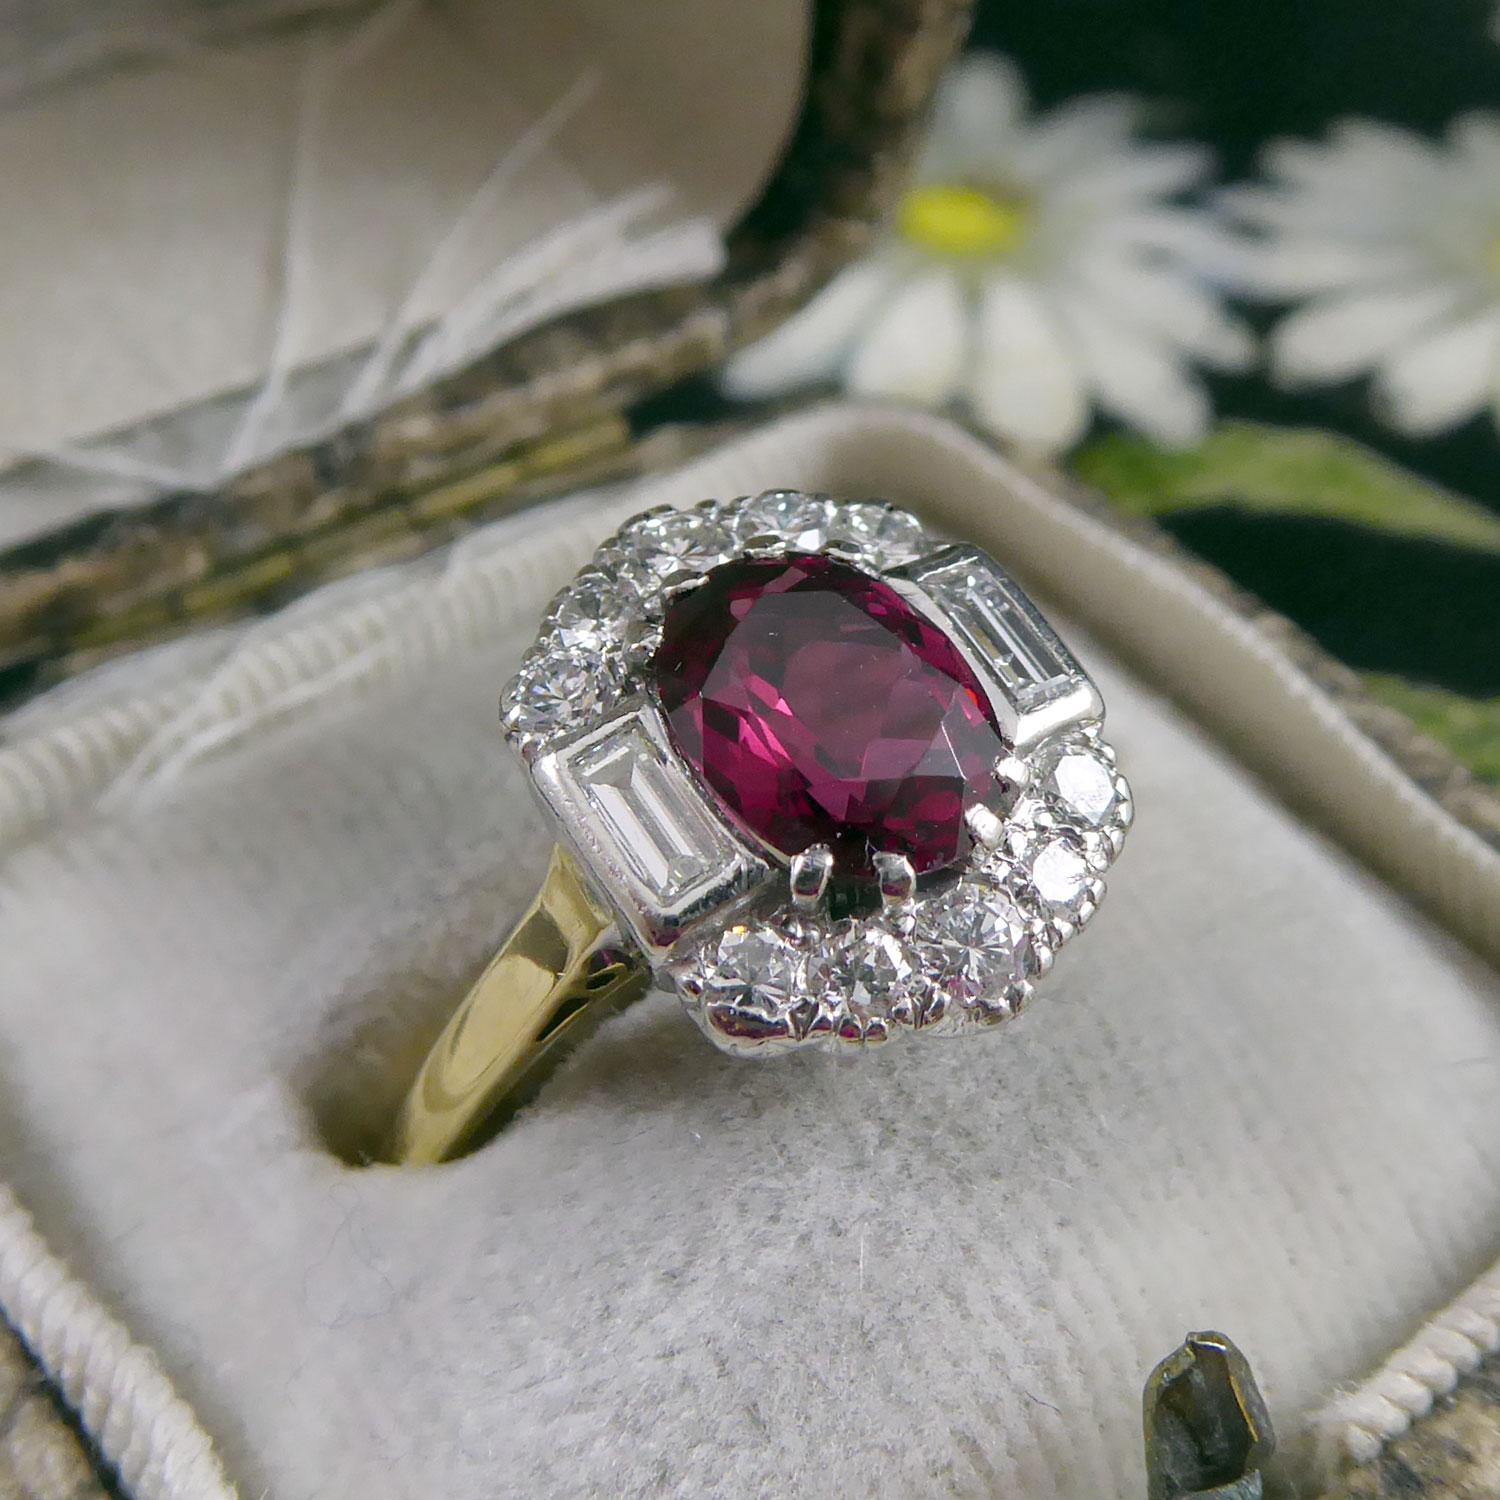 Here's a ring to keep everyone guessing.  It's set with a 1.26ct red spinel to the centre of a diamond cluster. 

The spinel is an oval-shaped mix cut held in four white claws with a rub-over set baguette cut diamond to each side and with an arch of